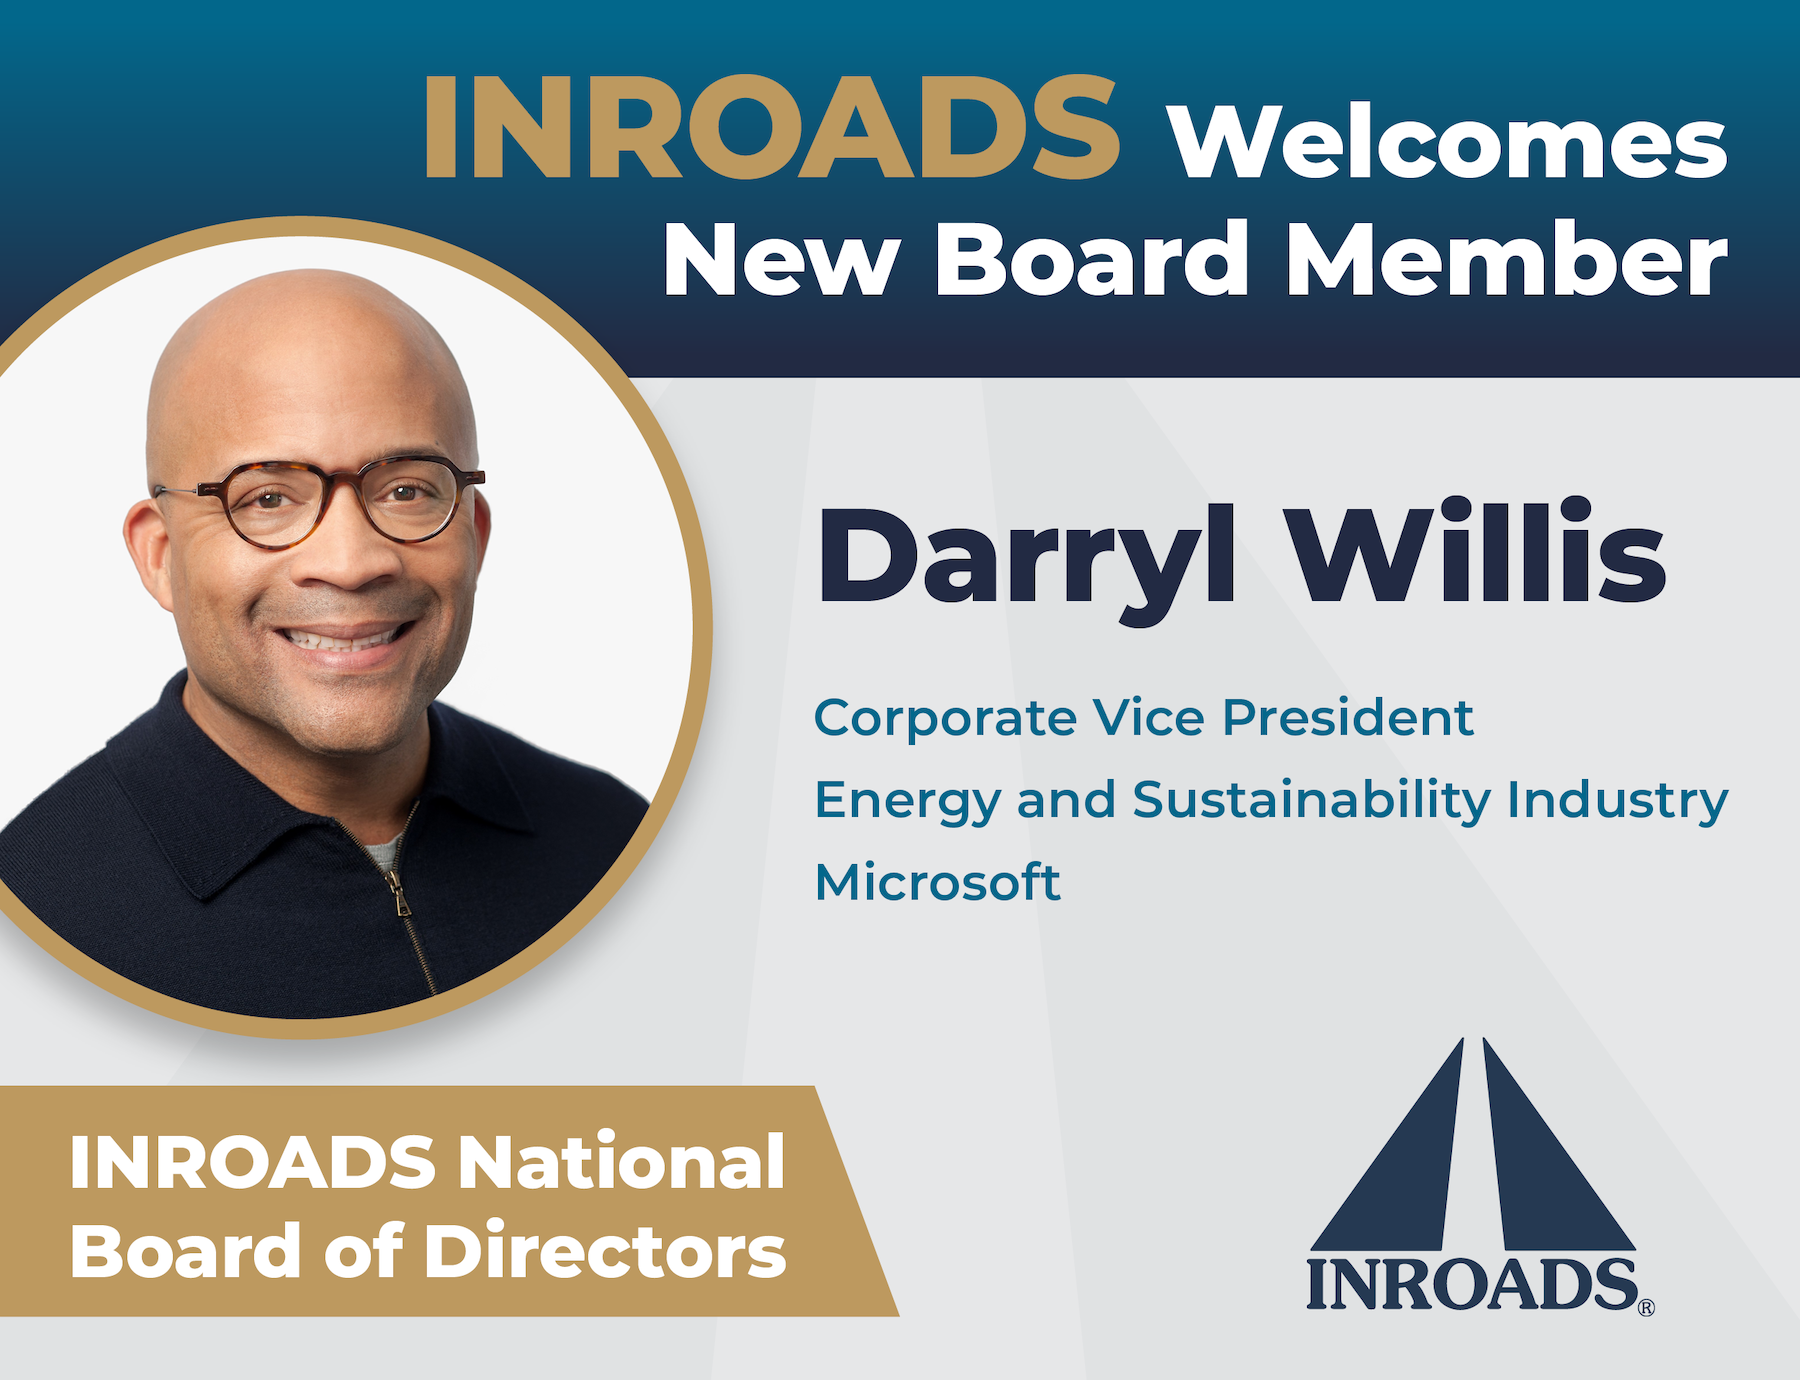 Featured image for “INROADS TAPS MICROSOFT CORPORATE VICE PRESIDENT DARRYL WILLIS FOR ITS NATIONAL BOARD OF DIRECTORS”